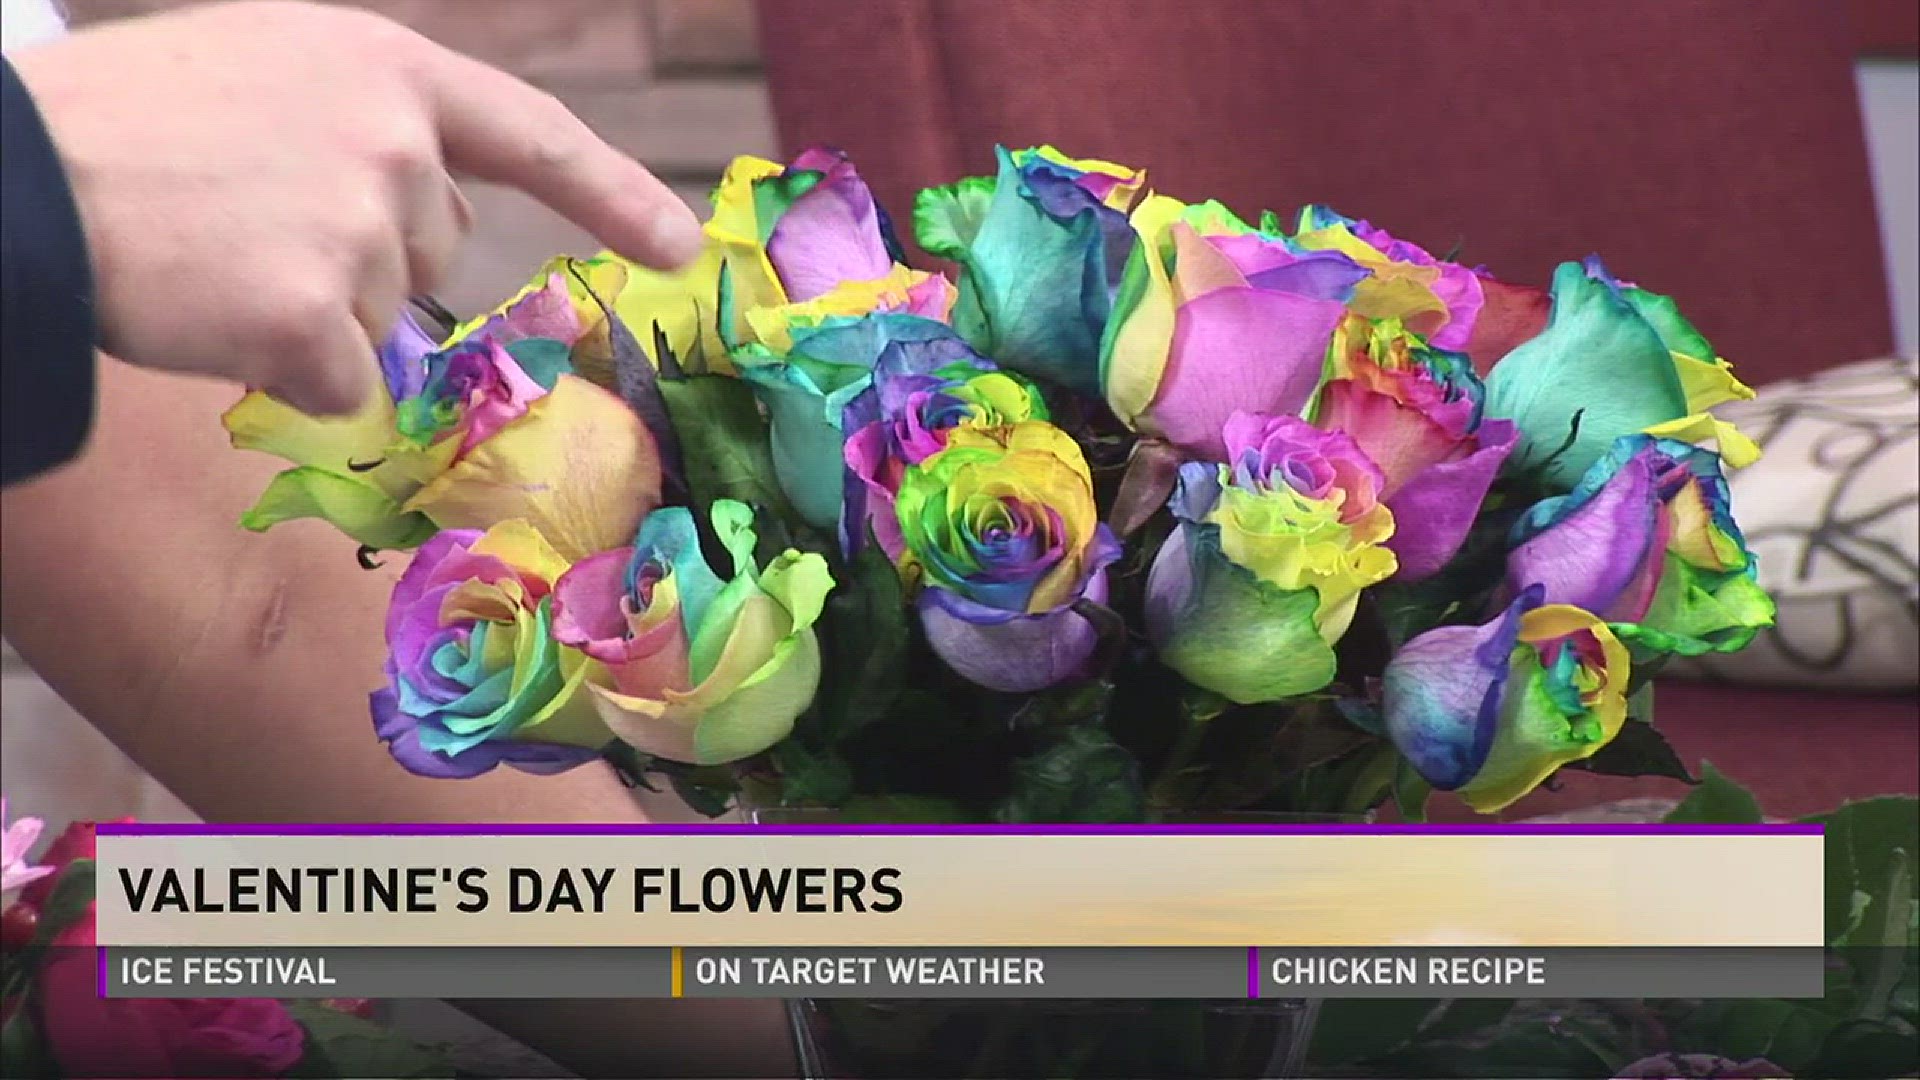 Sunday is Valentines Day... which means you'd better get those flowers ordered.   Our Flower Expert J Schwanke from uBloom dot comis here with tips on buying flowers.. and some unusual ones that will help you WOW your Valentine!